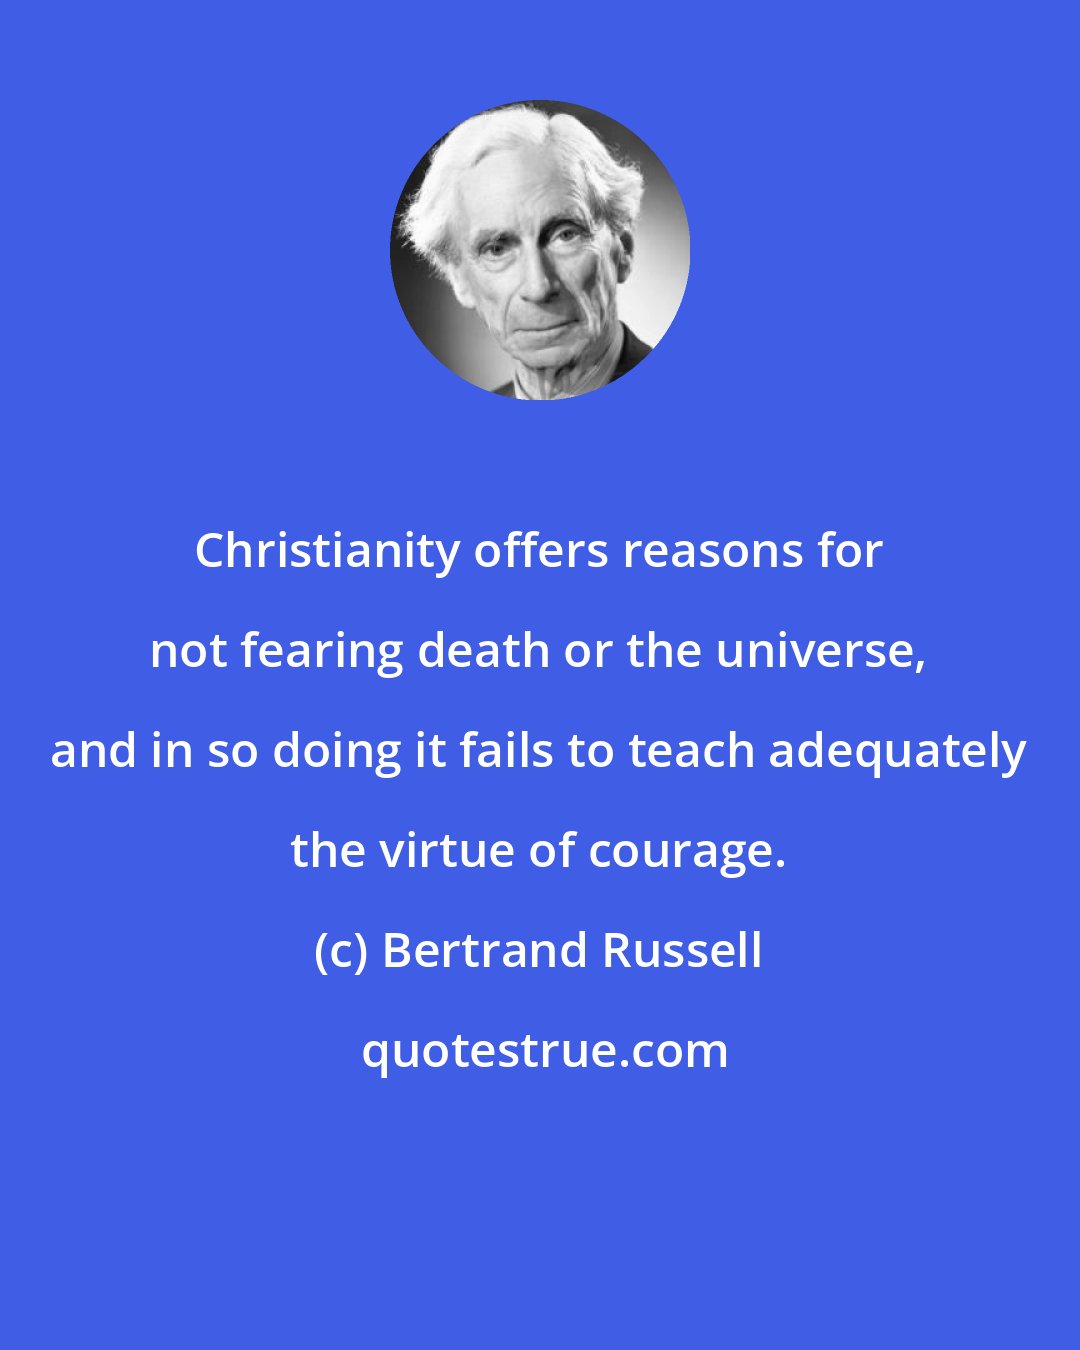 Bertrand Russell: Christianity offers reasons for not fearing death or the universe, and in so doing it fails to teach adequately the virtue of courage.